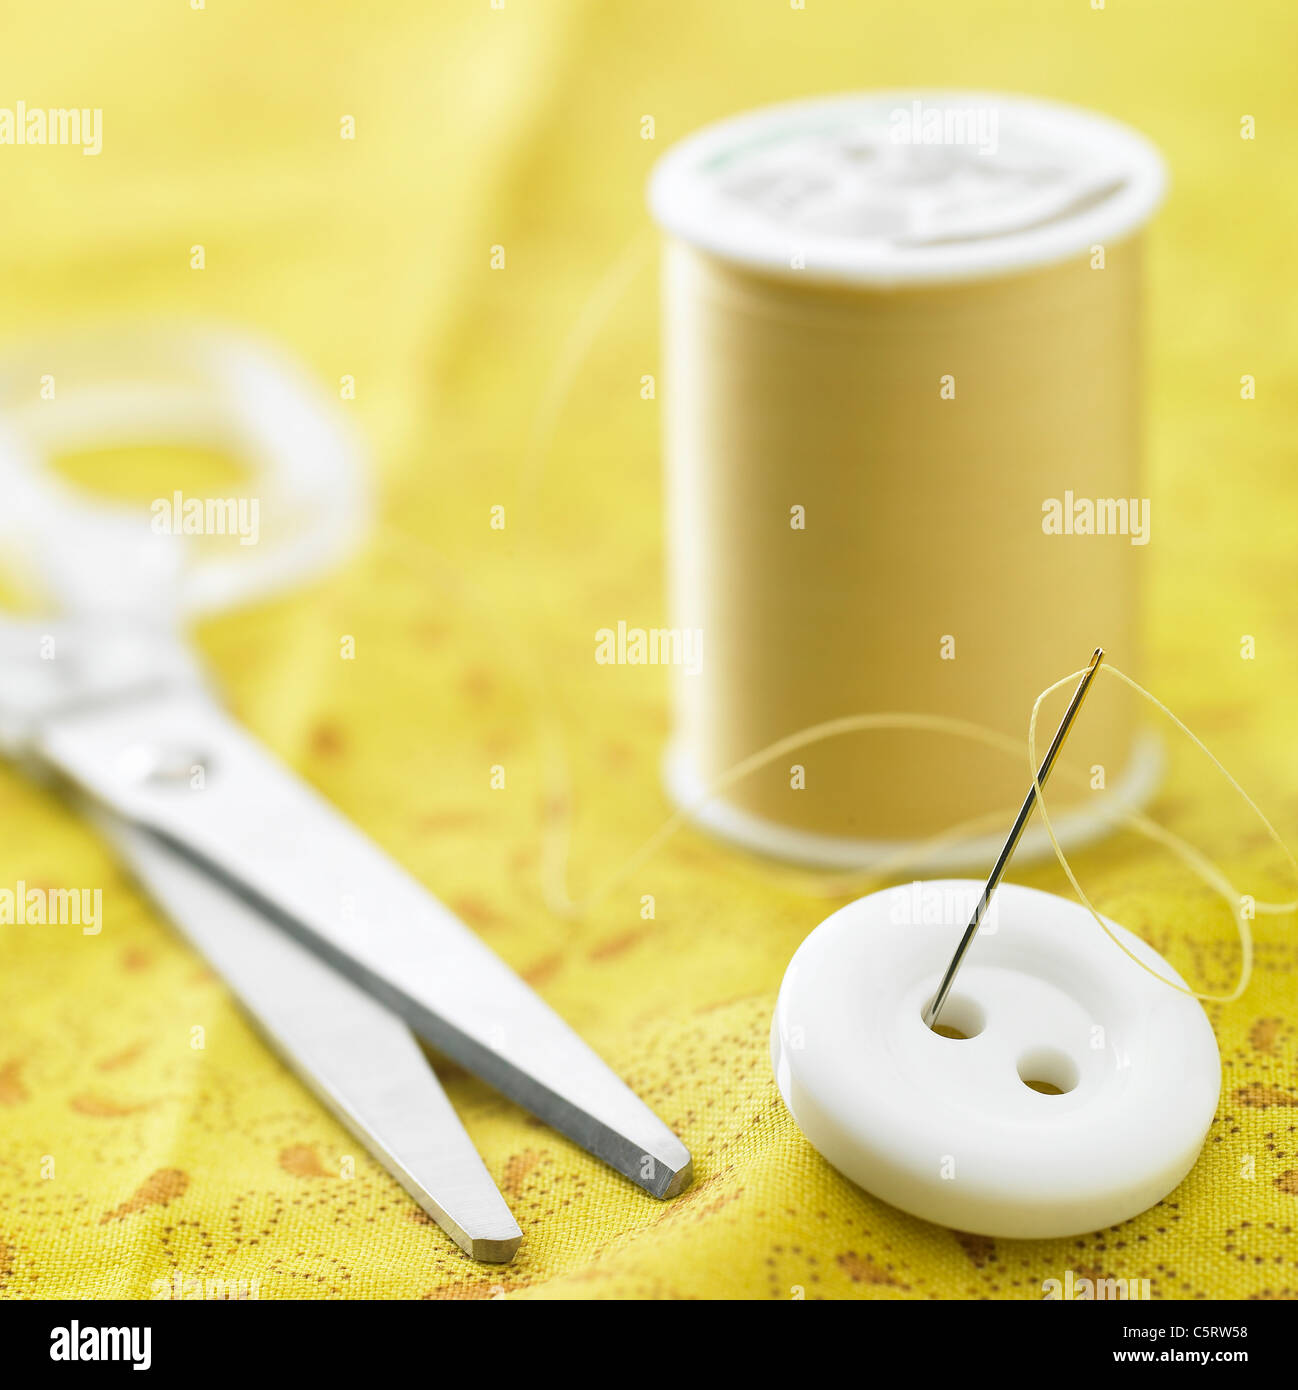 Thread, scissors and other objects Stock Photo